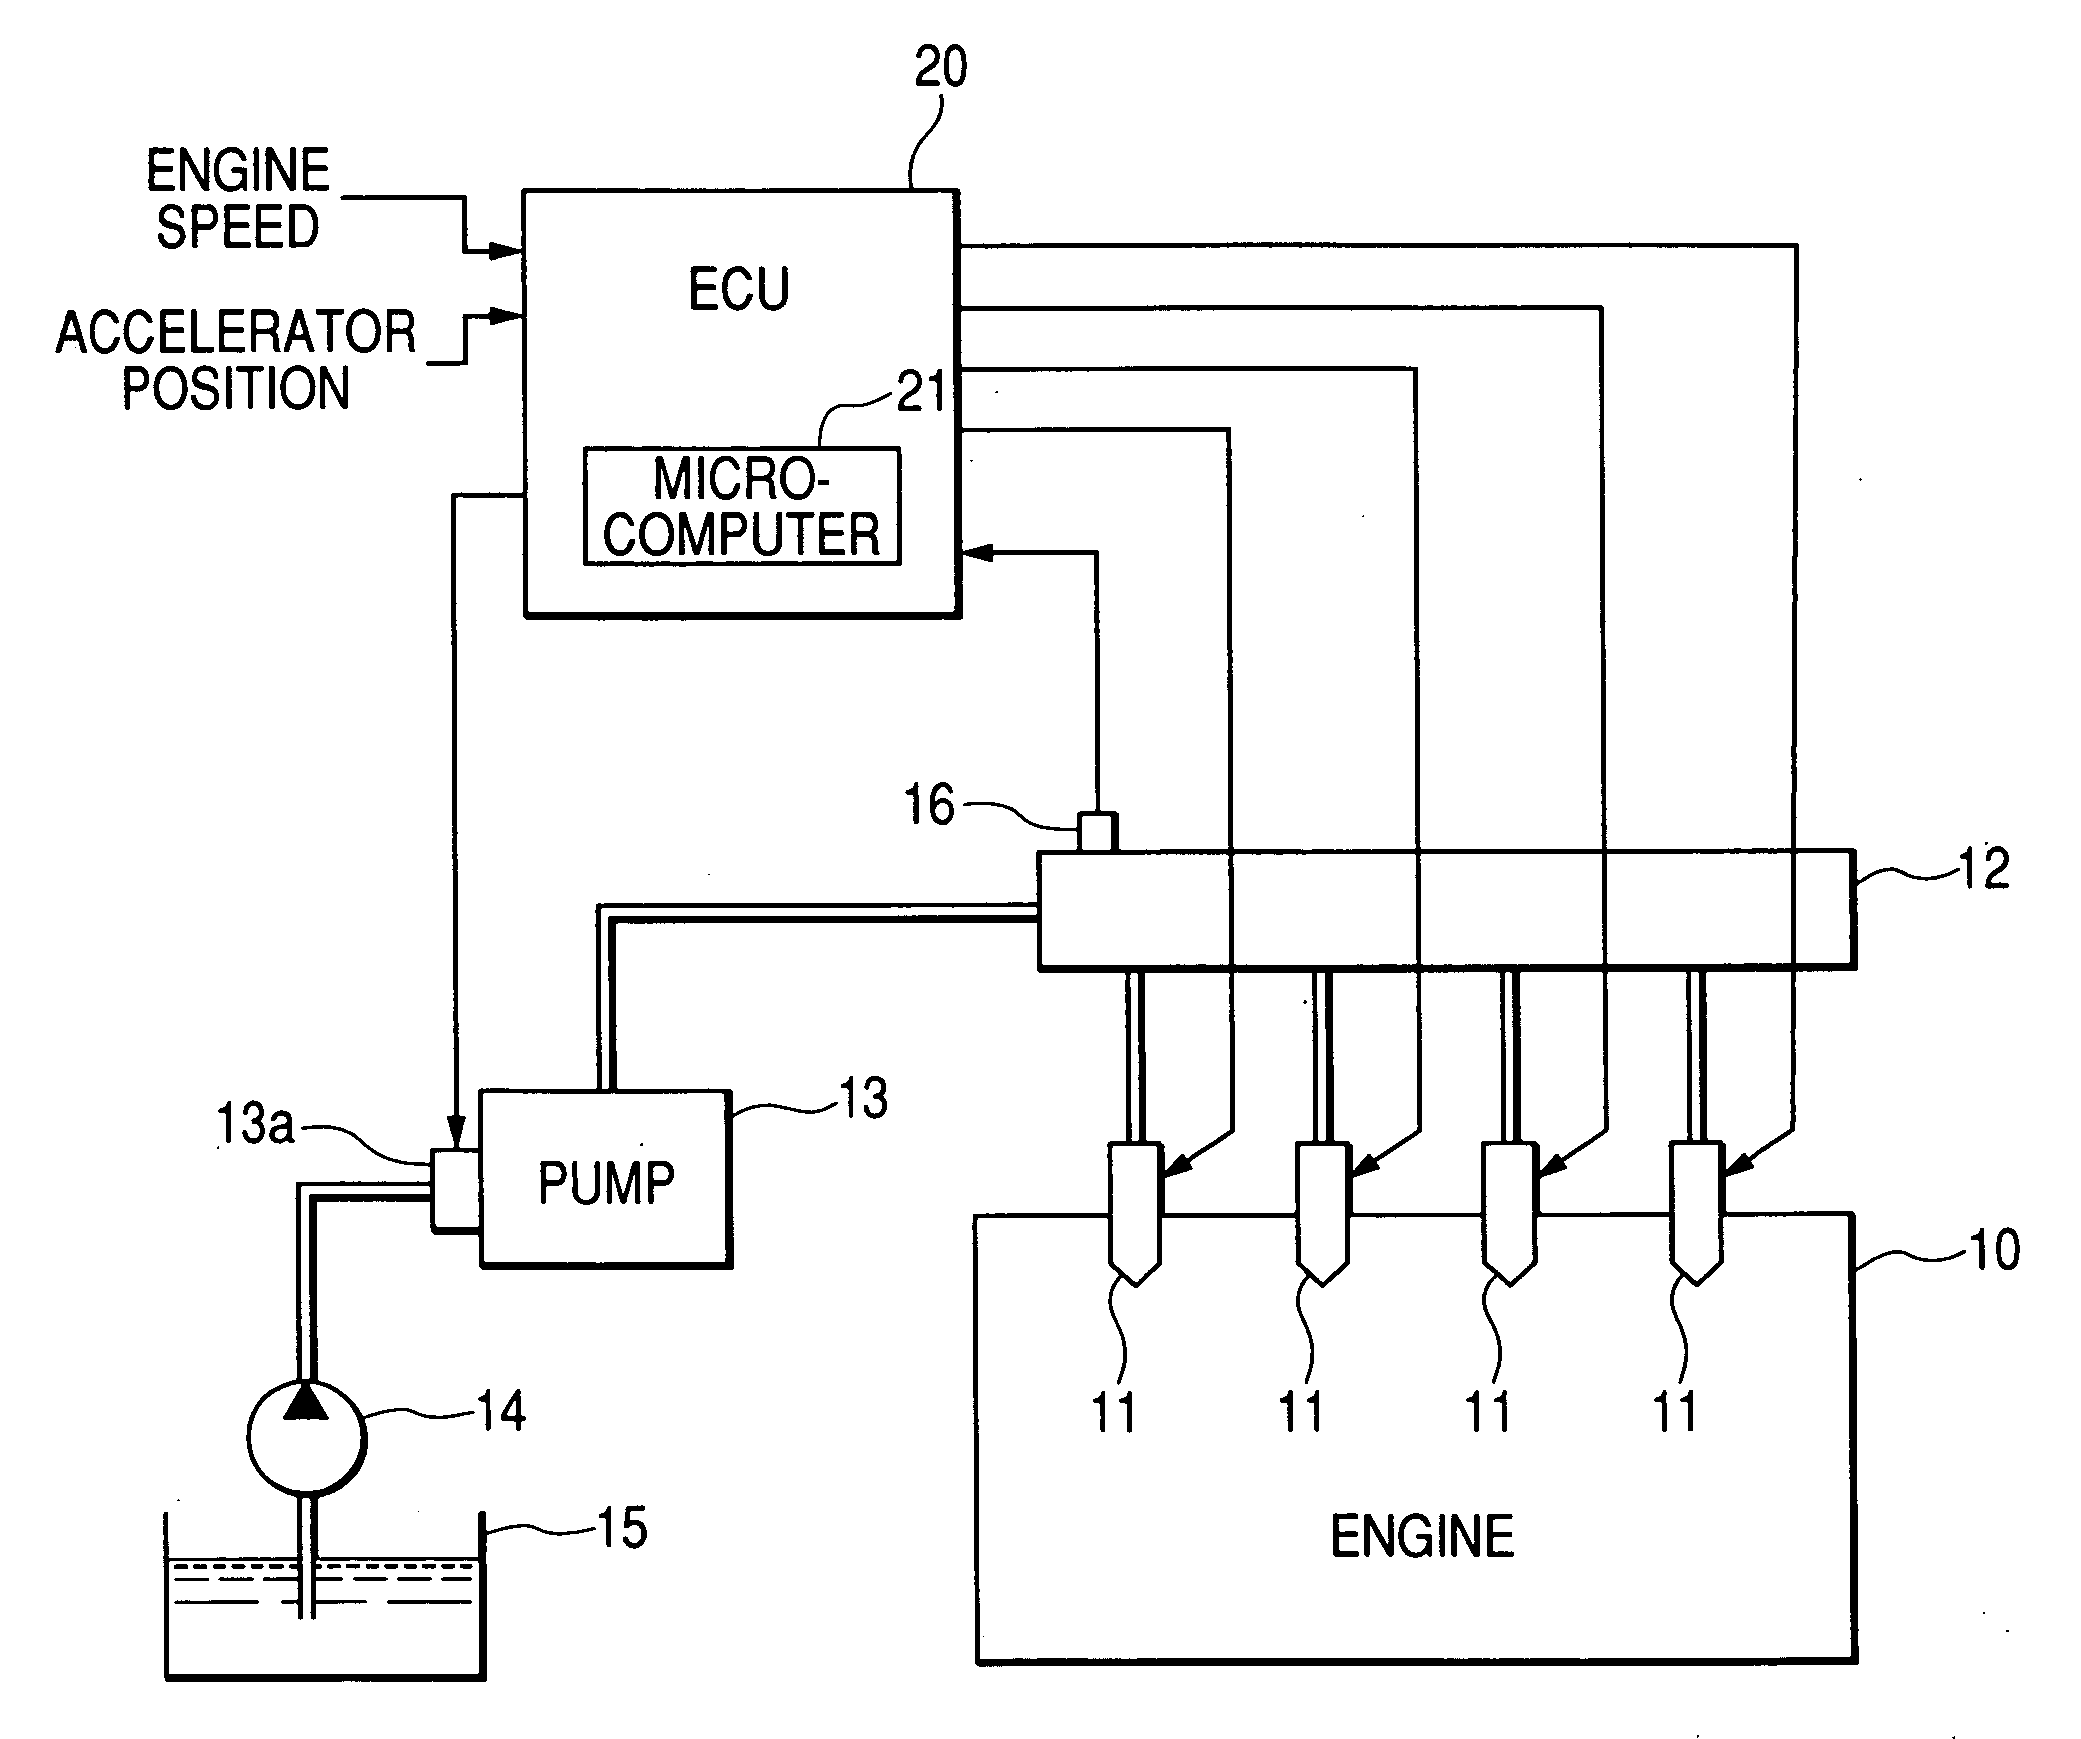 Common rail fuel injection system designed to avoid error in determining common rail fuel pressure